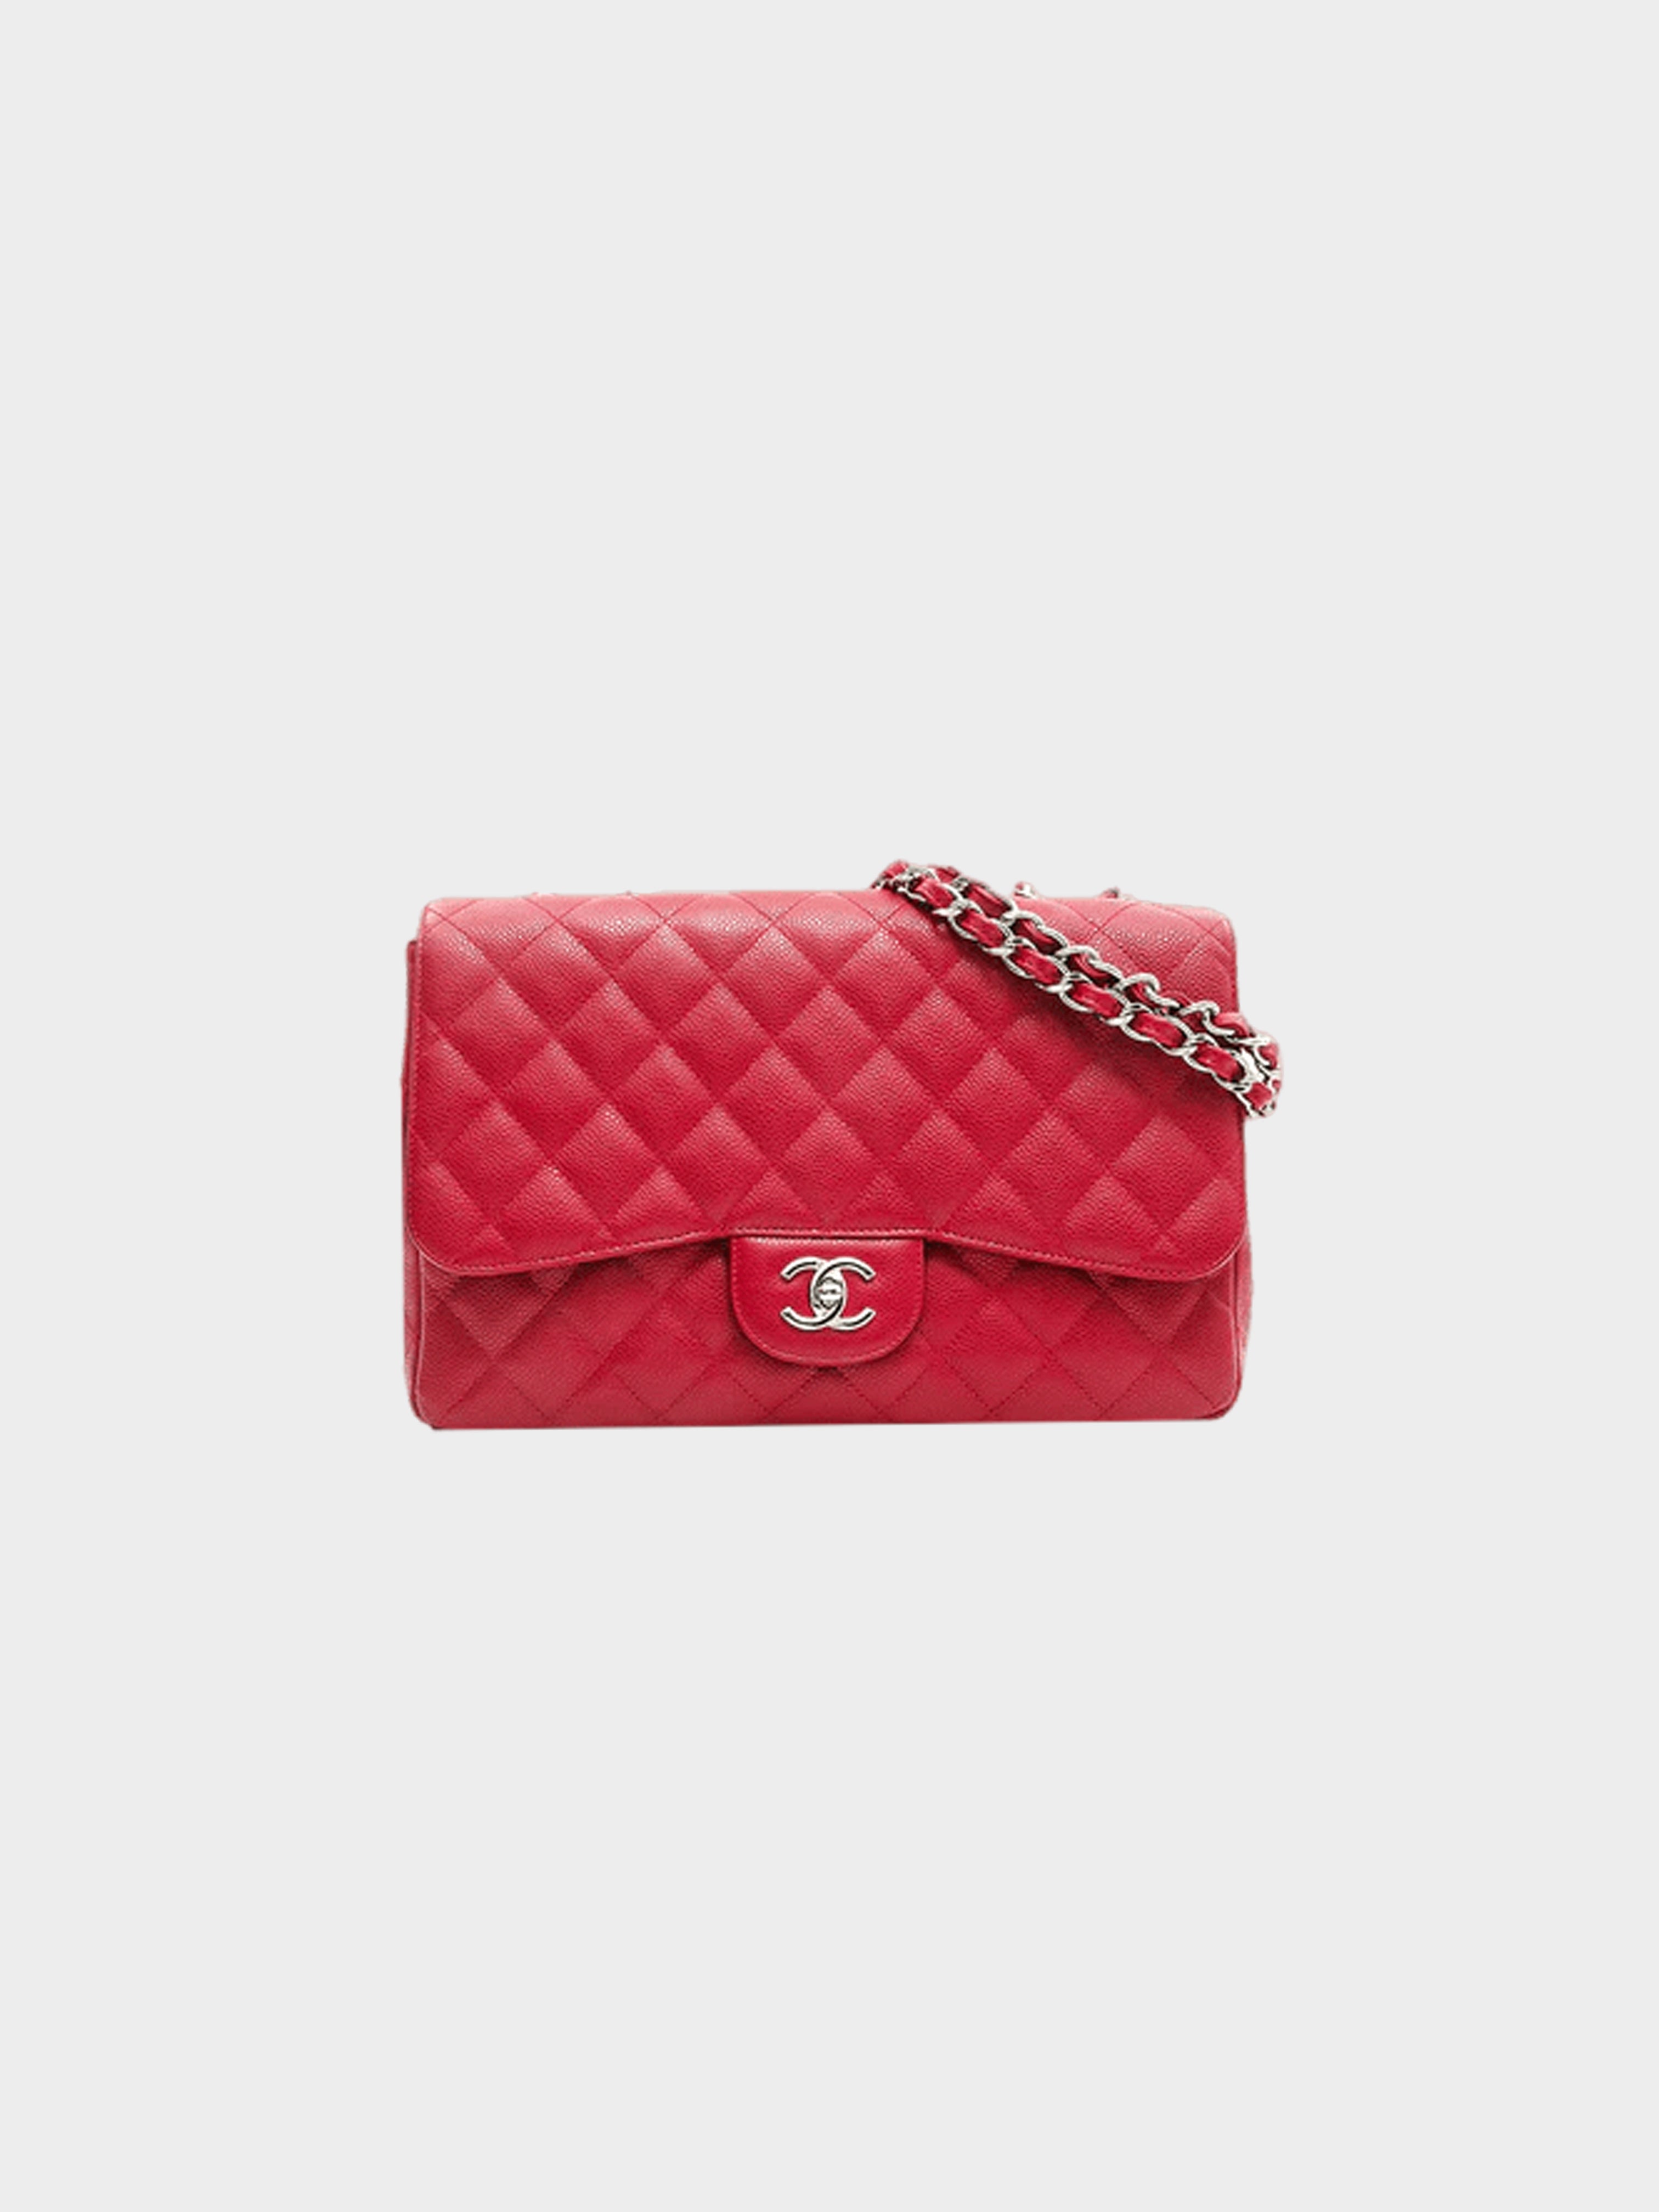 Chanel 2009 Red Classic Flap Bag